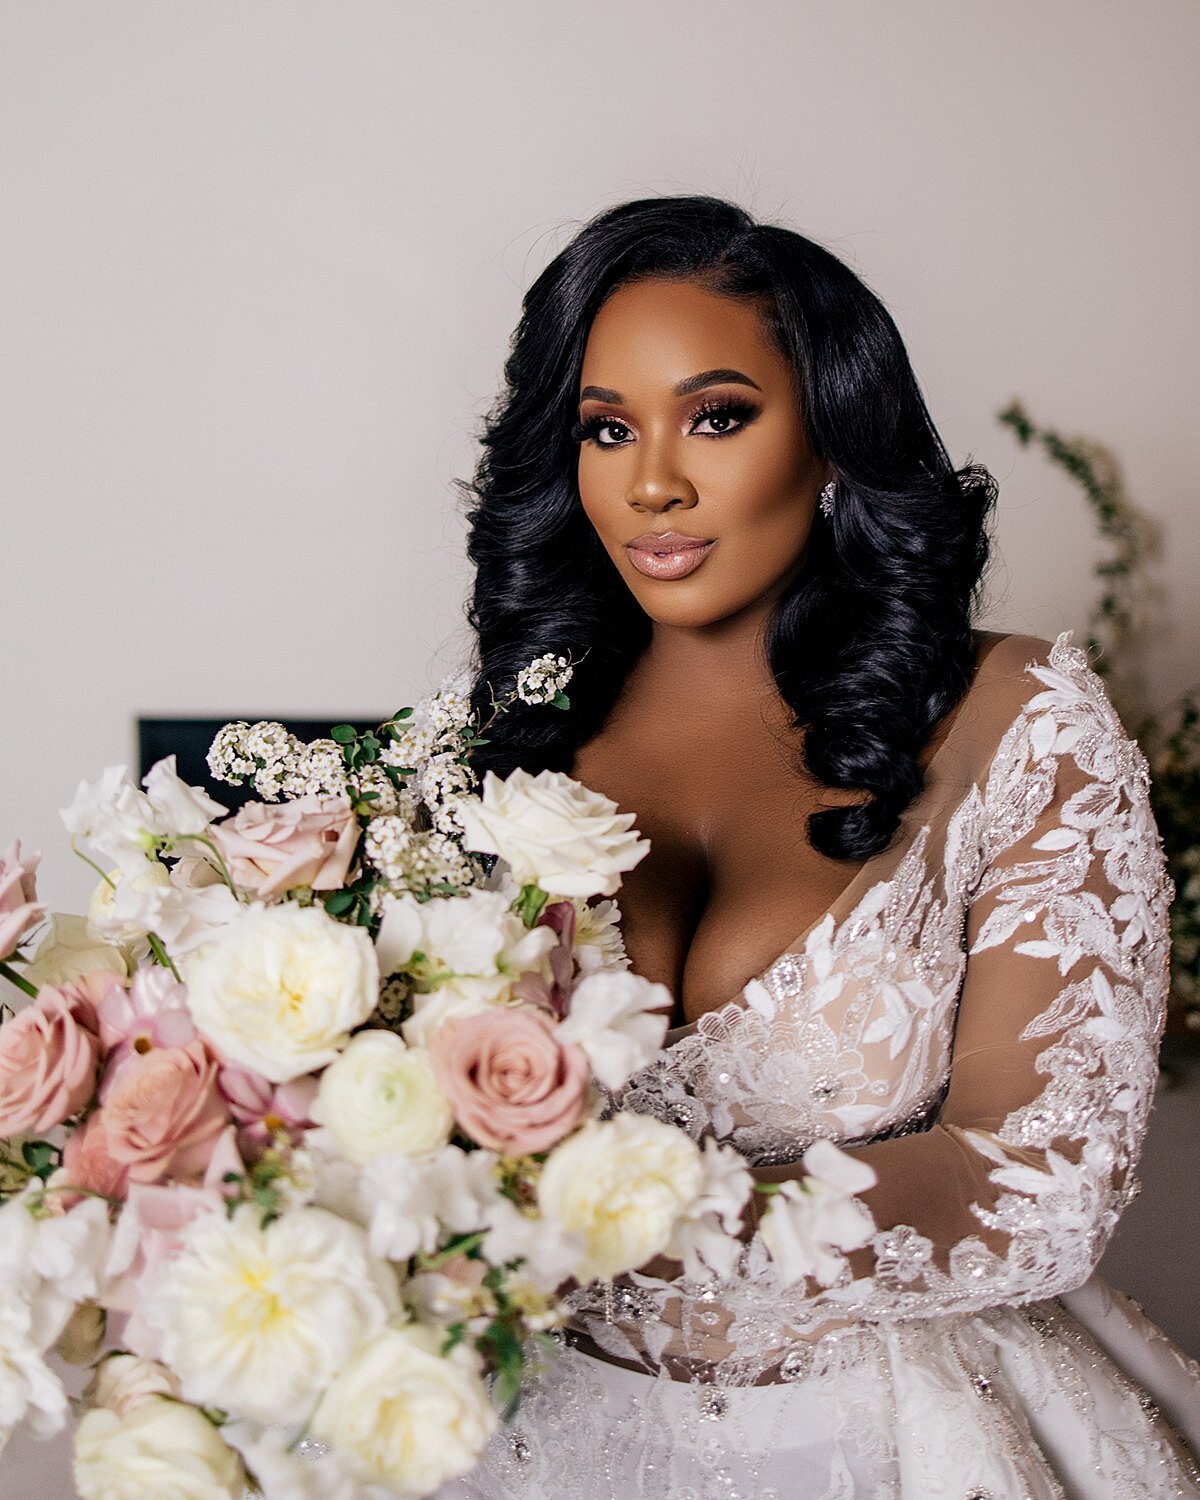 A black bride poses with a bouquet in Baltimore, MD.